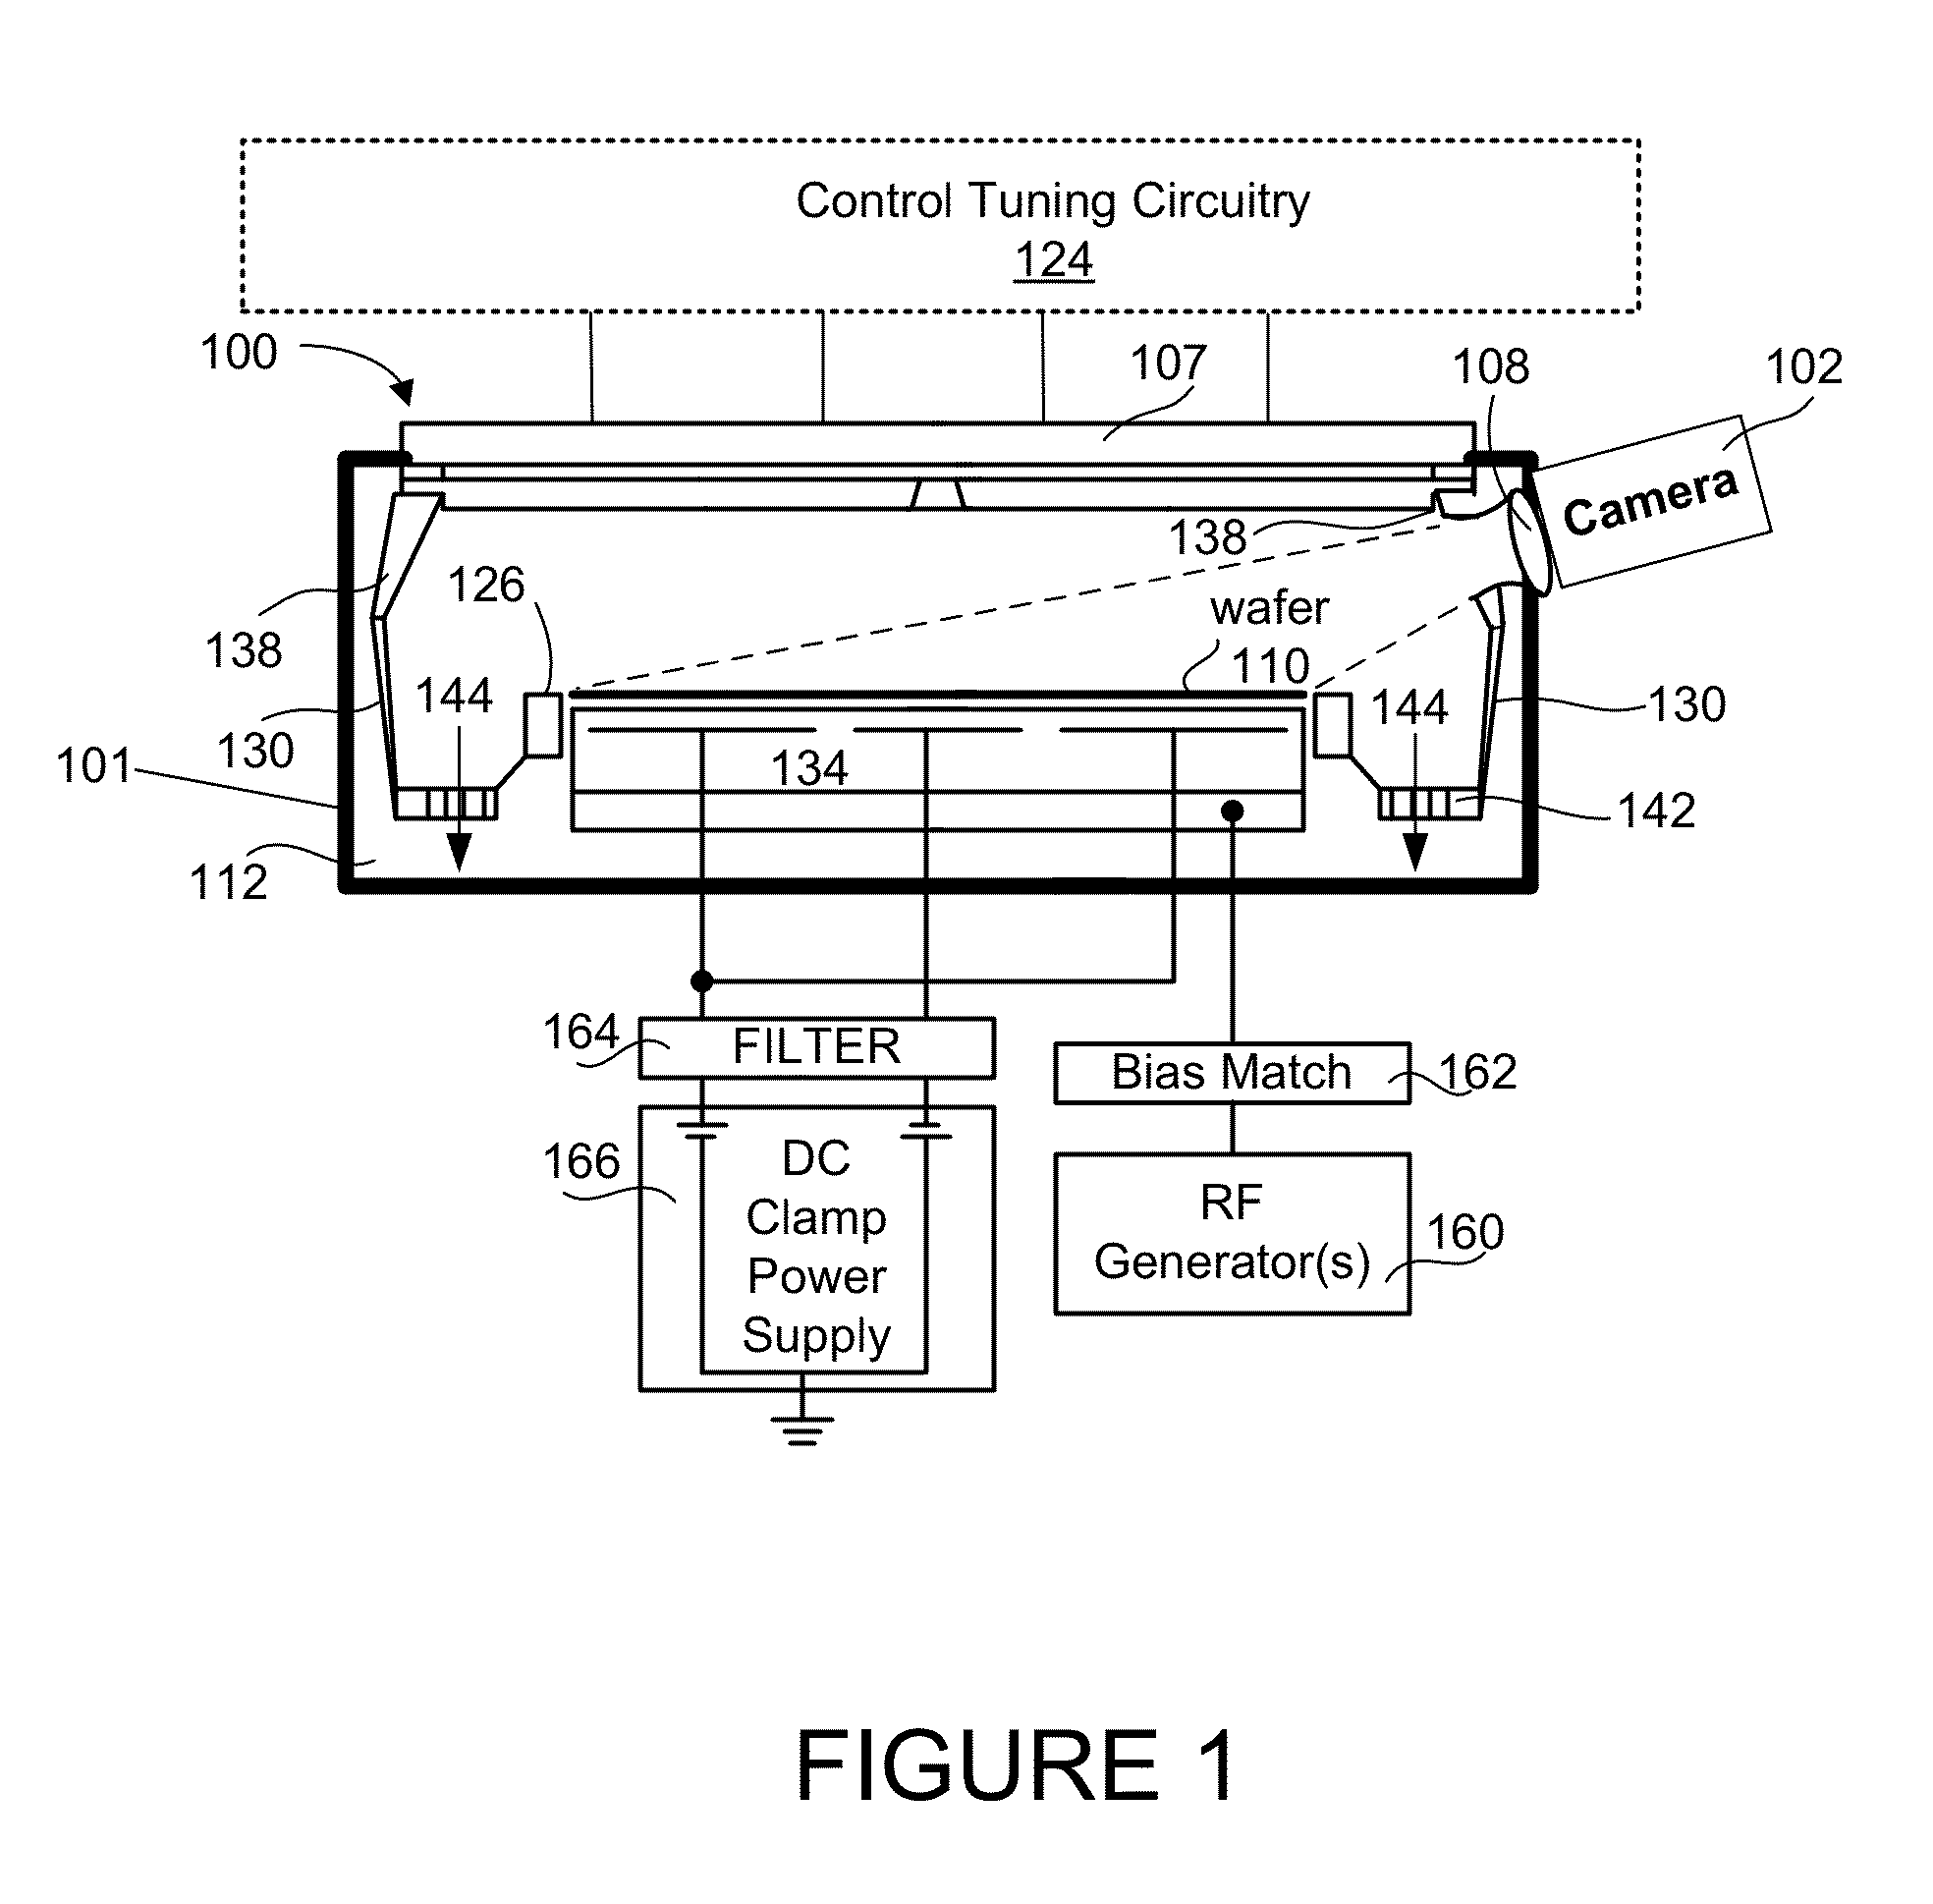 Systems and methods for detecting endpoint for through-silicon via reveal applications